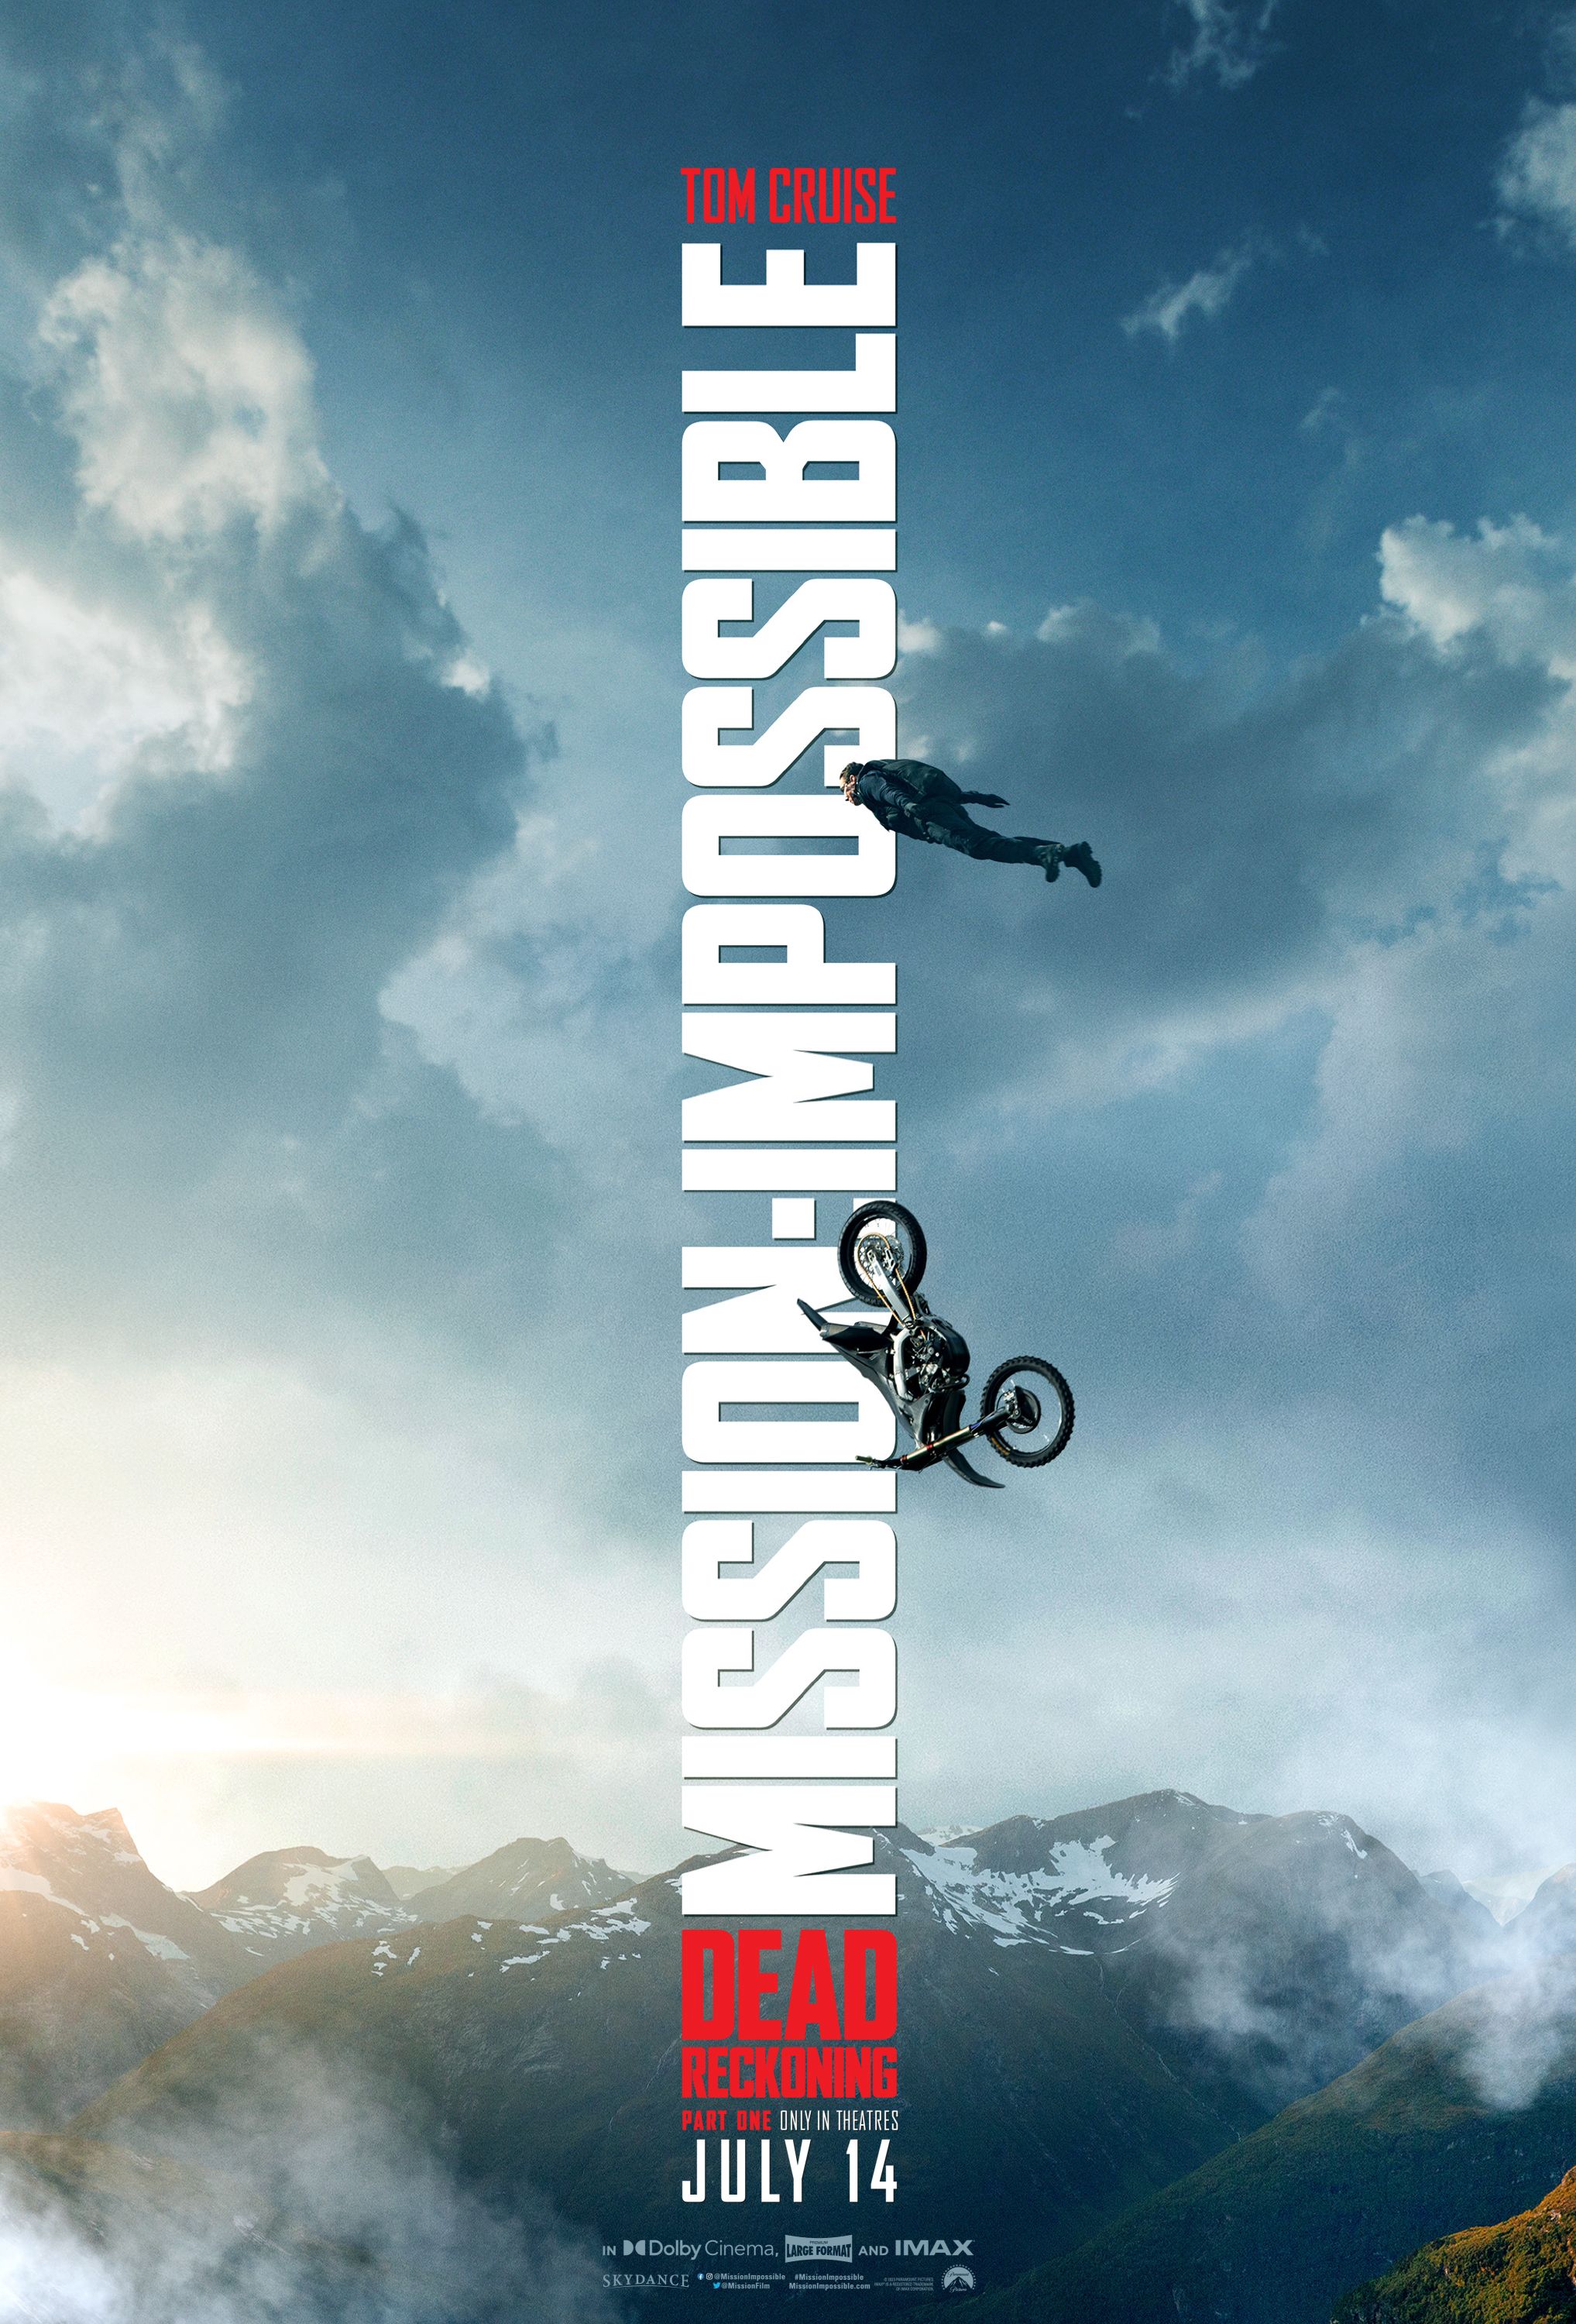 Poster for the first part of Mission Impossible Dead Reckoning